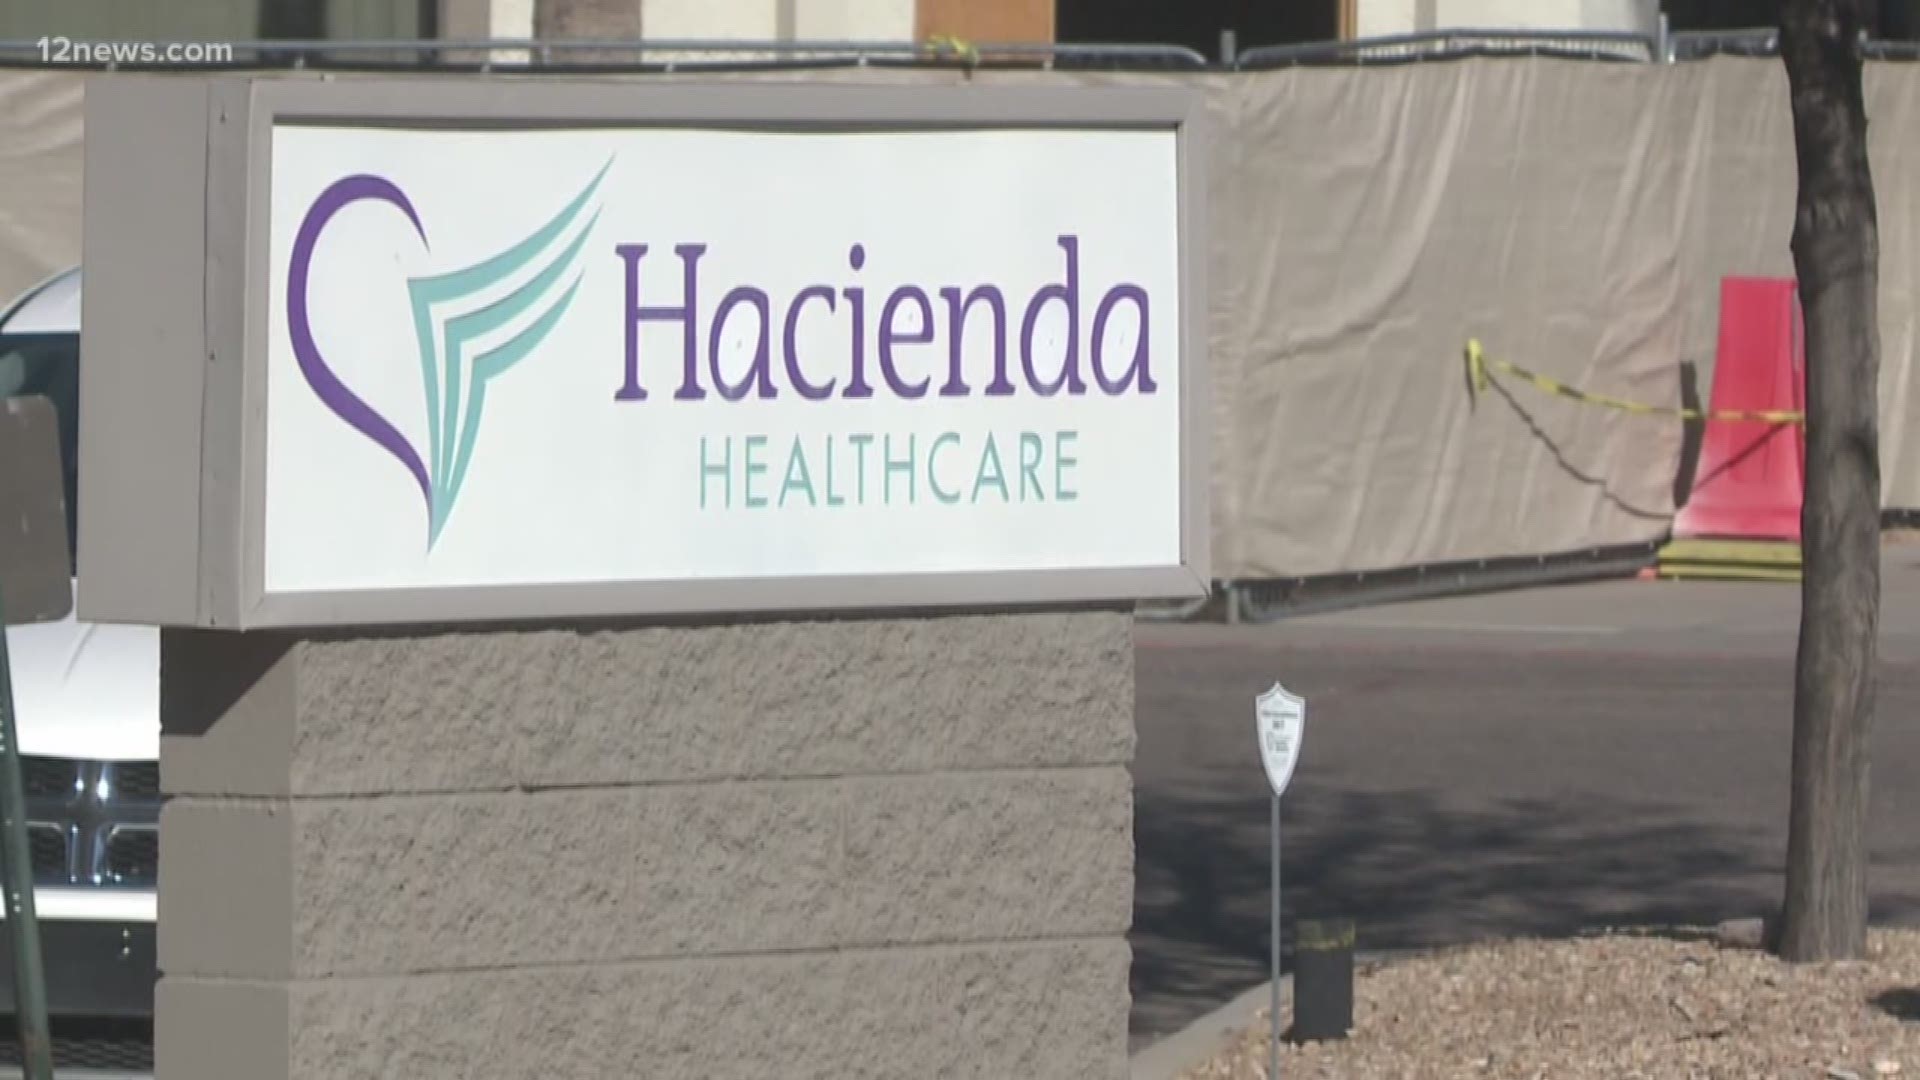 One of the biggest questions surrounding the controversy unfolding at Hacienda Healthcare is what will happen to the baby born to a mother in a vegetative state? We provide possible solutions.